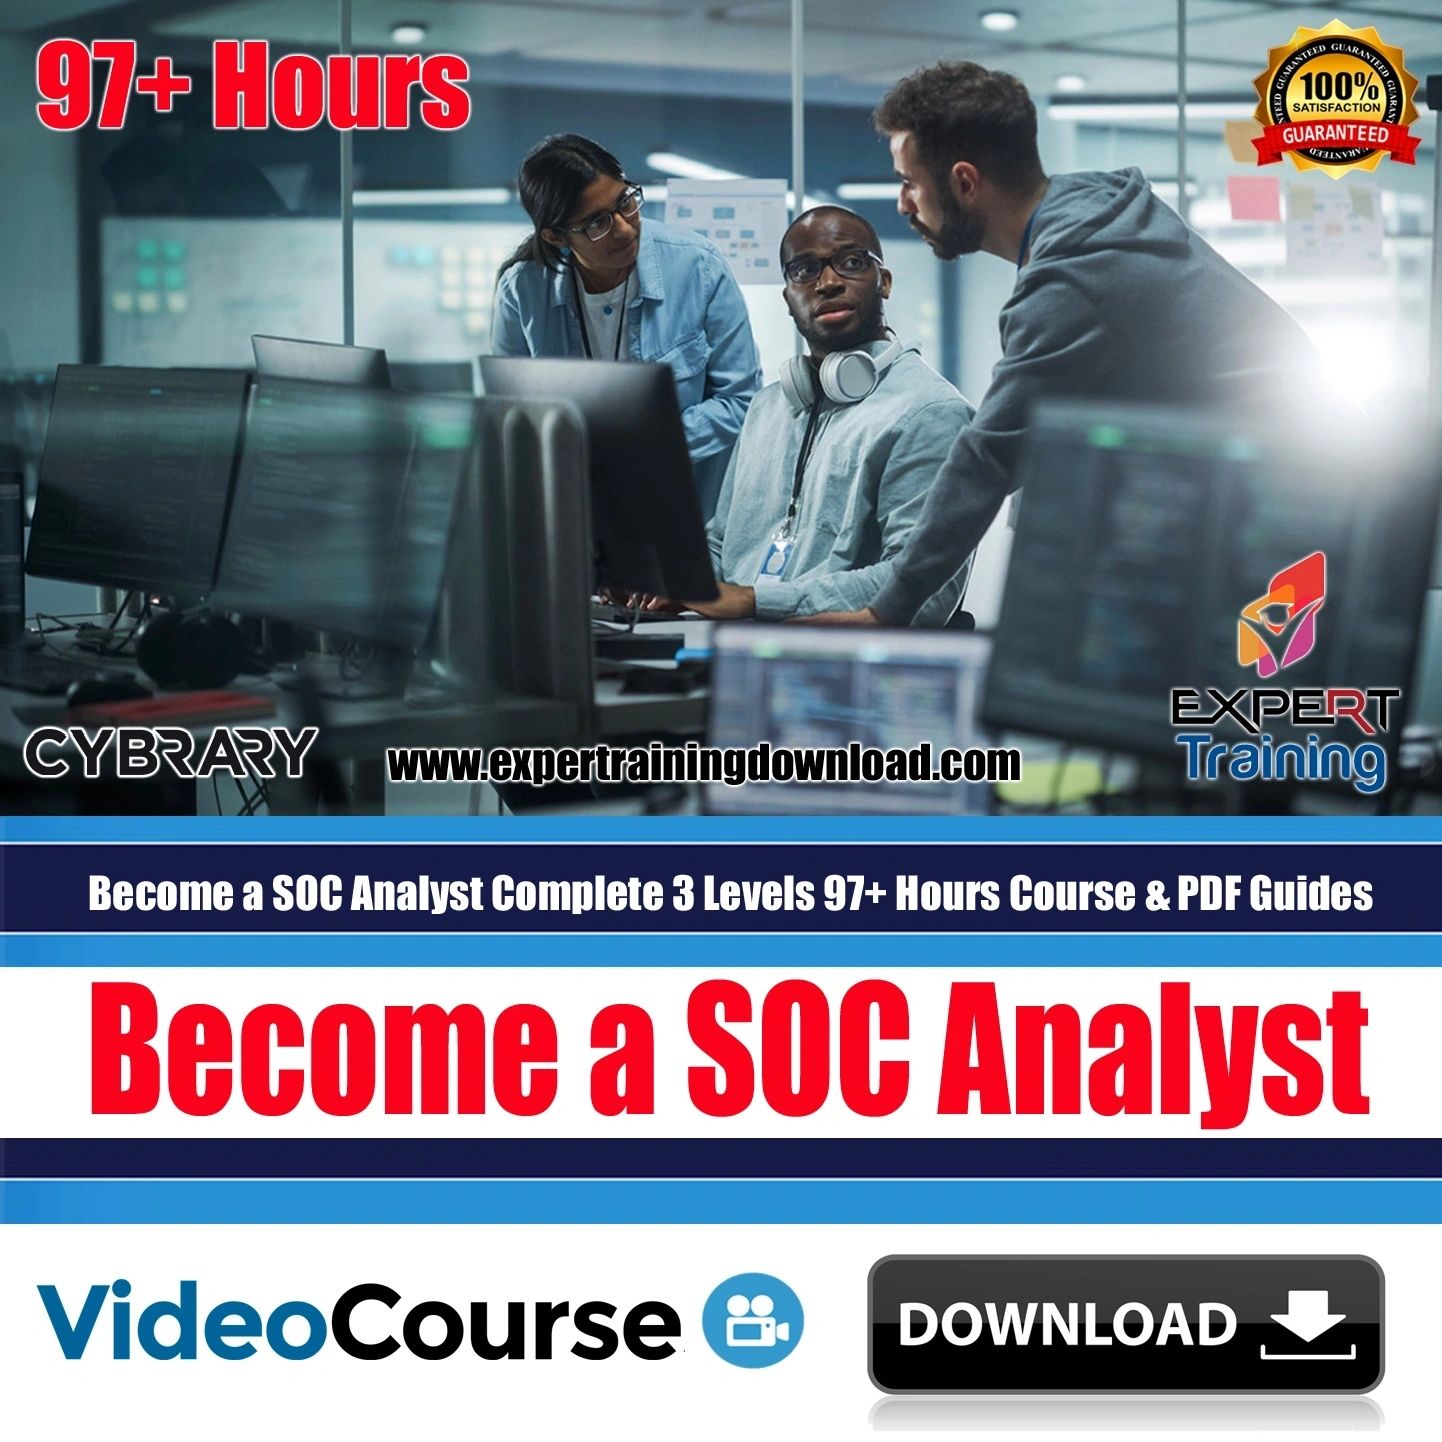 Become a SOC Analyst Complete 3 Levels 97+ Hours Course & PDF Guides